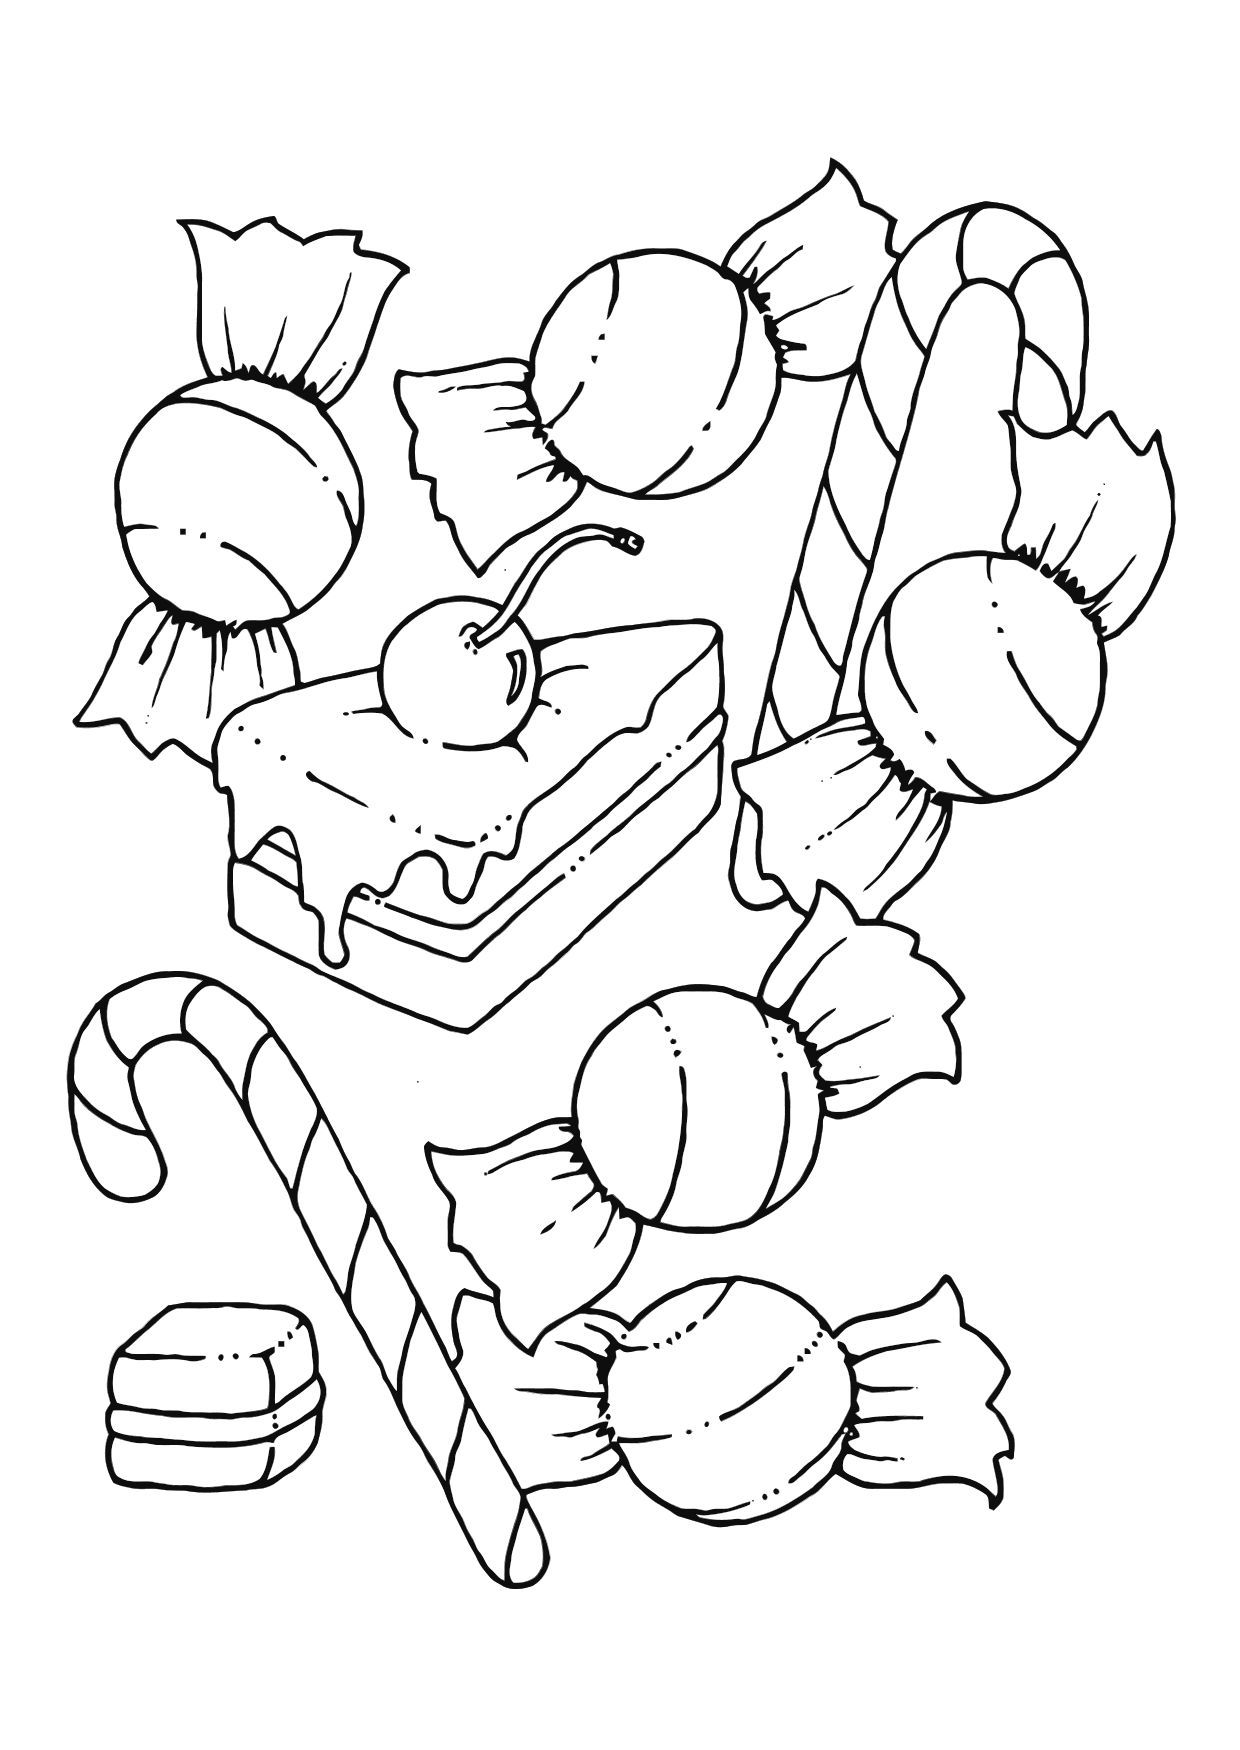 Free Candies Coloring Page, Download Free Candies Coloring Page ...